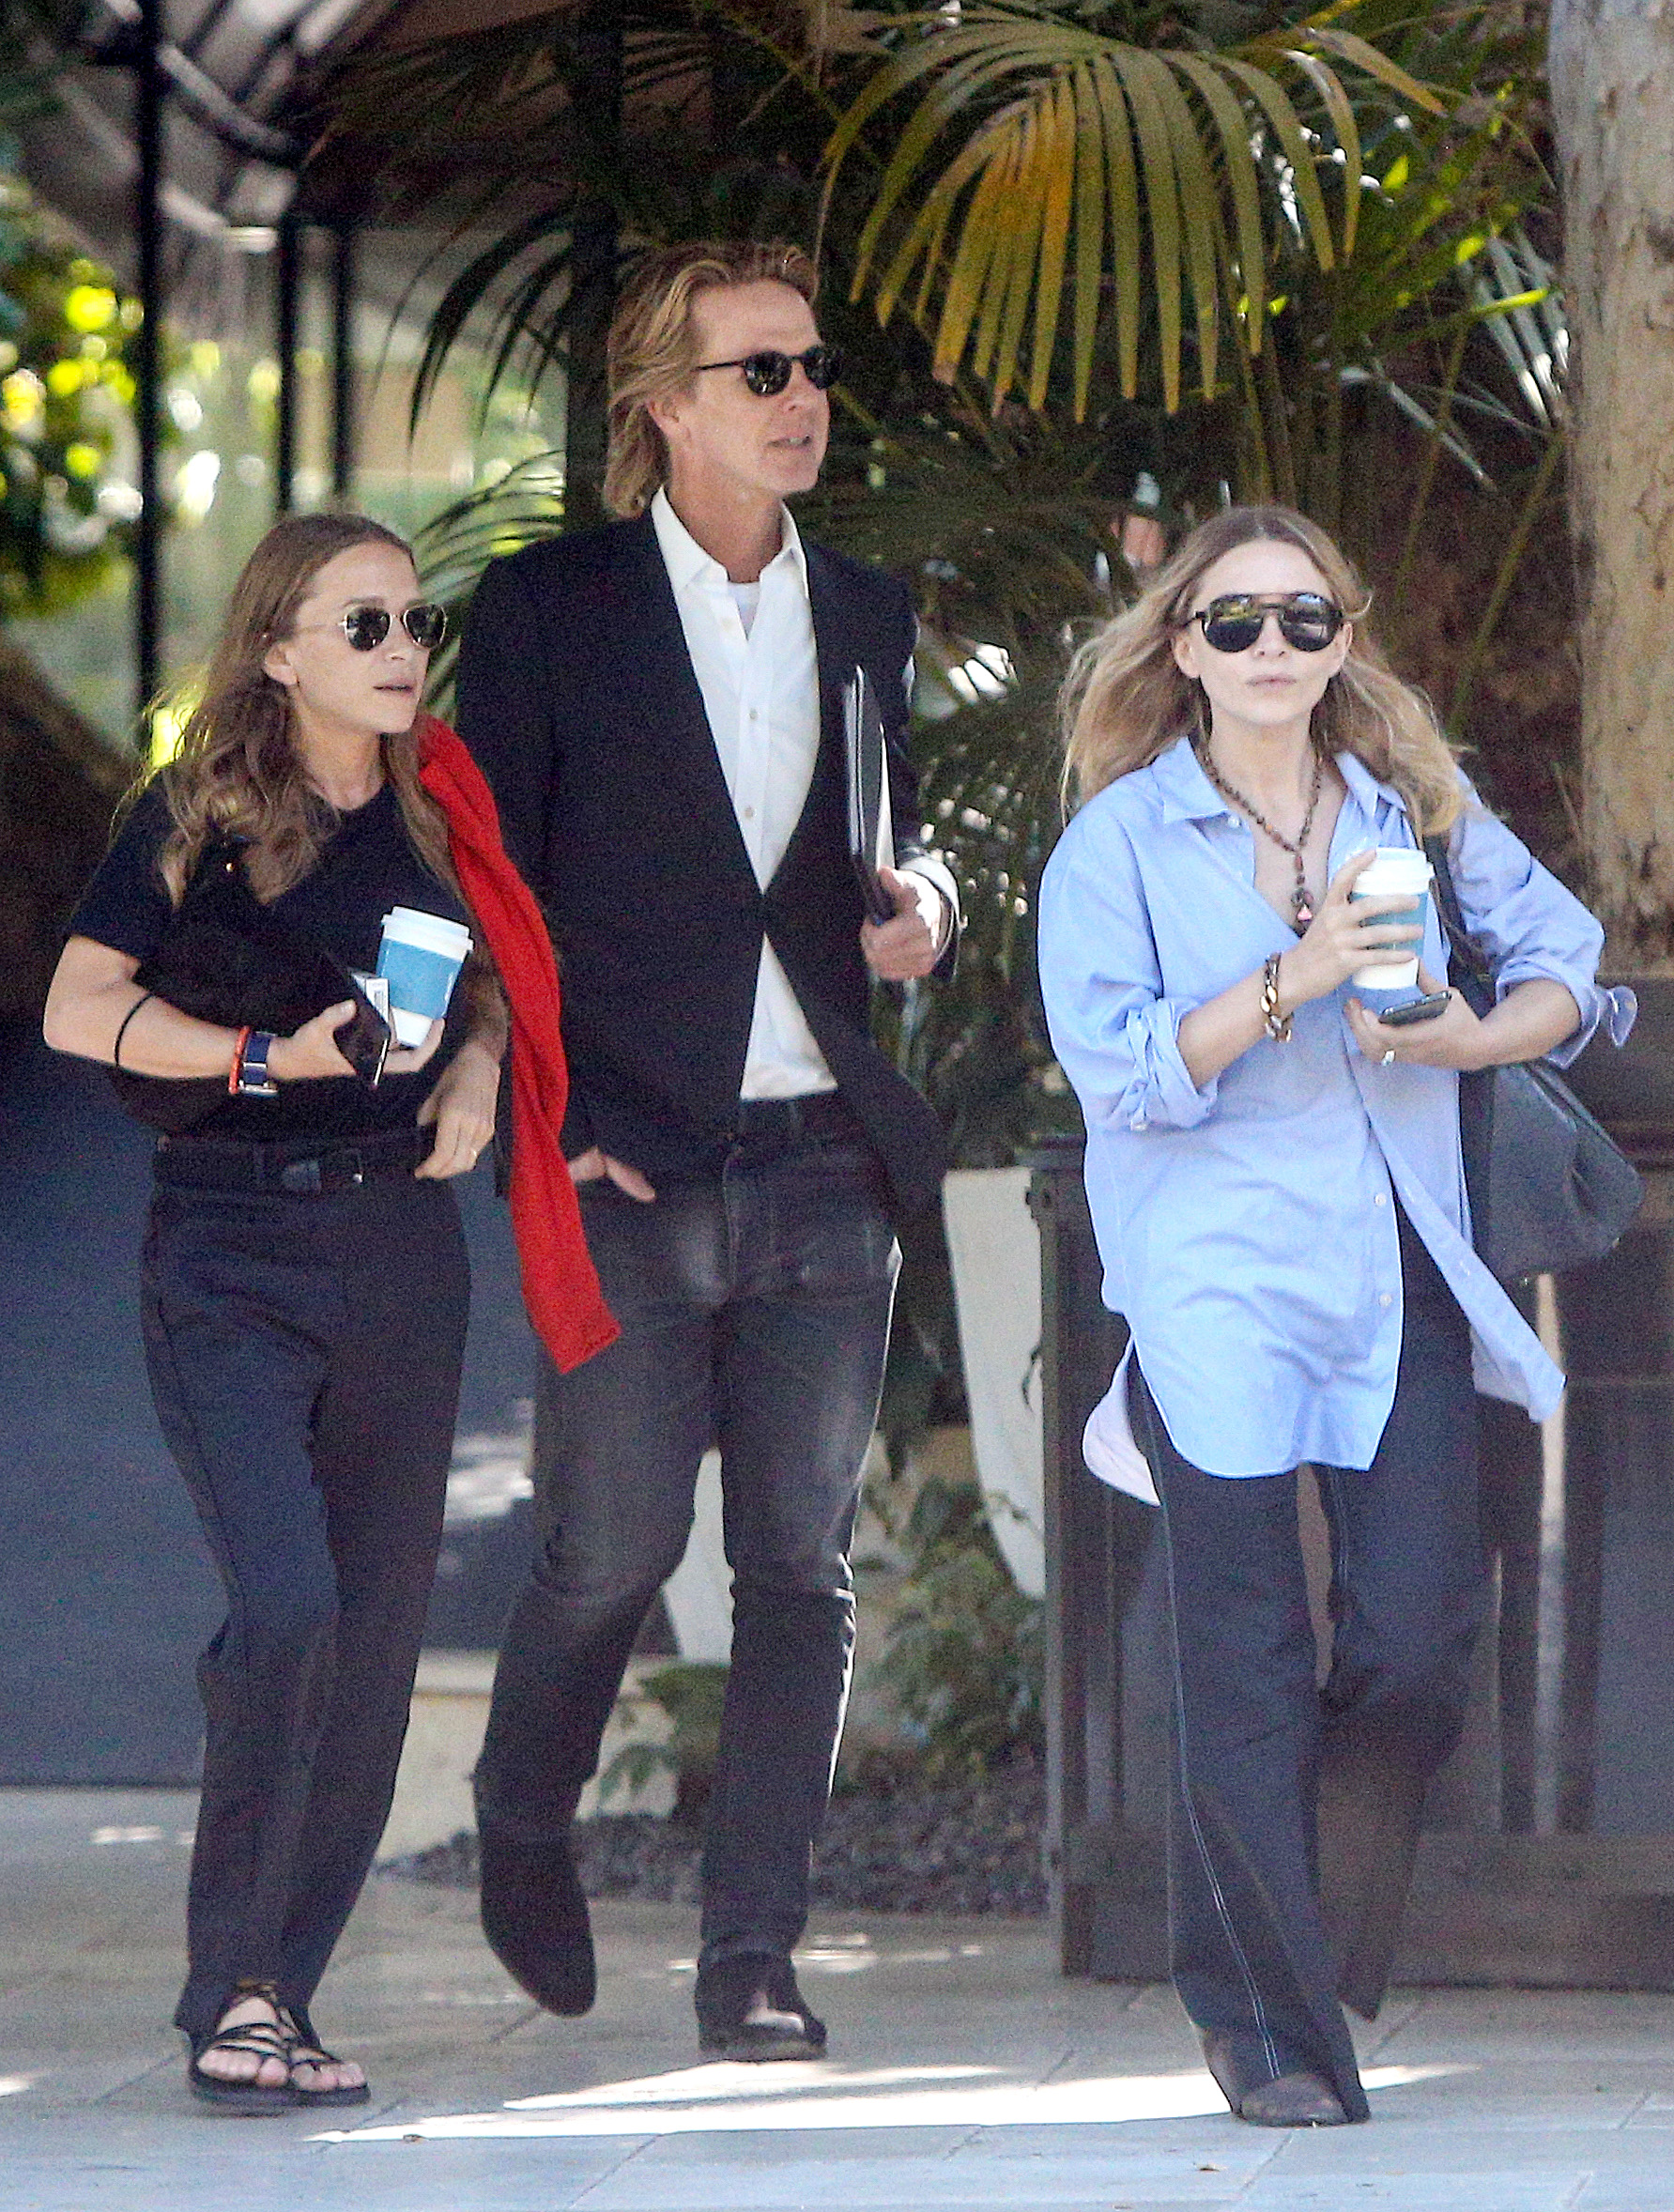 Mary Kate Olsen Twins Porn - The Olsen Twins Look Chic While Stepping Out for a Meeting in L.A.